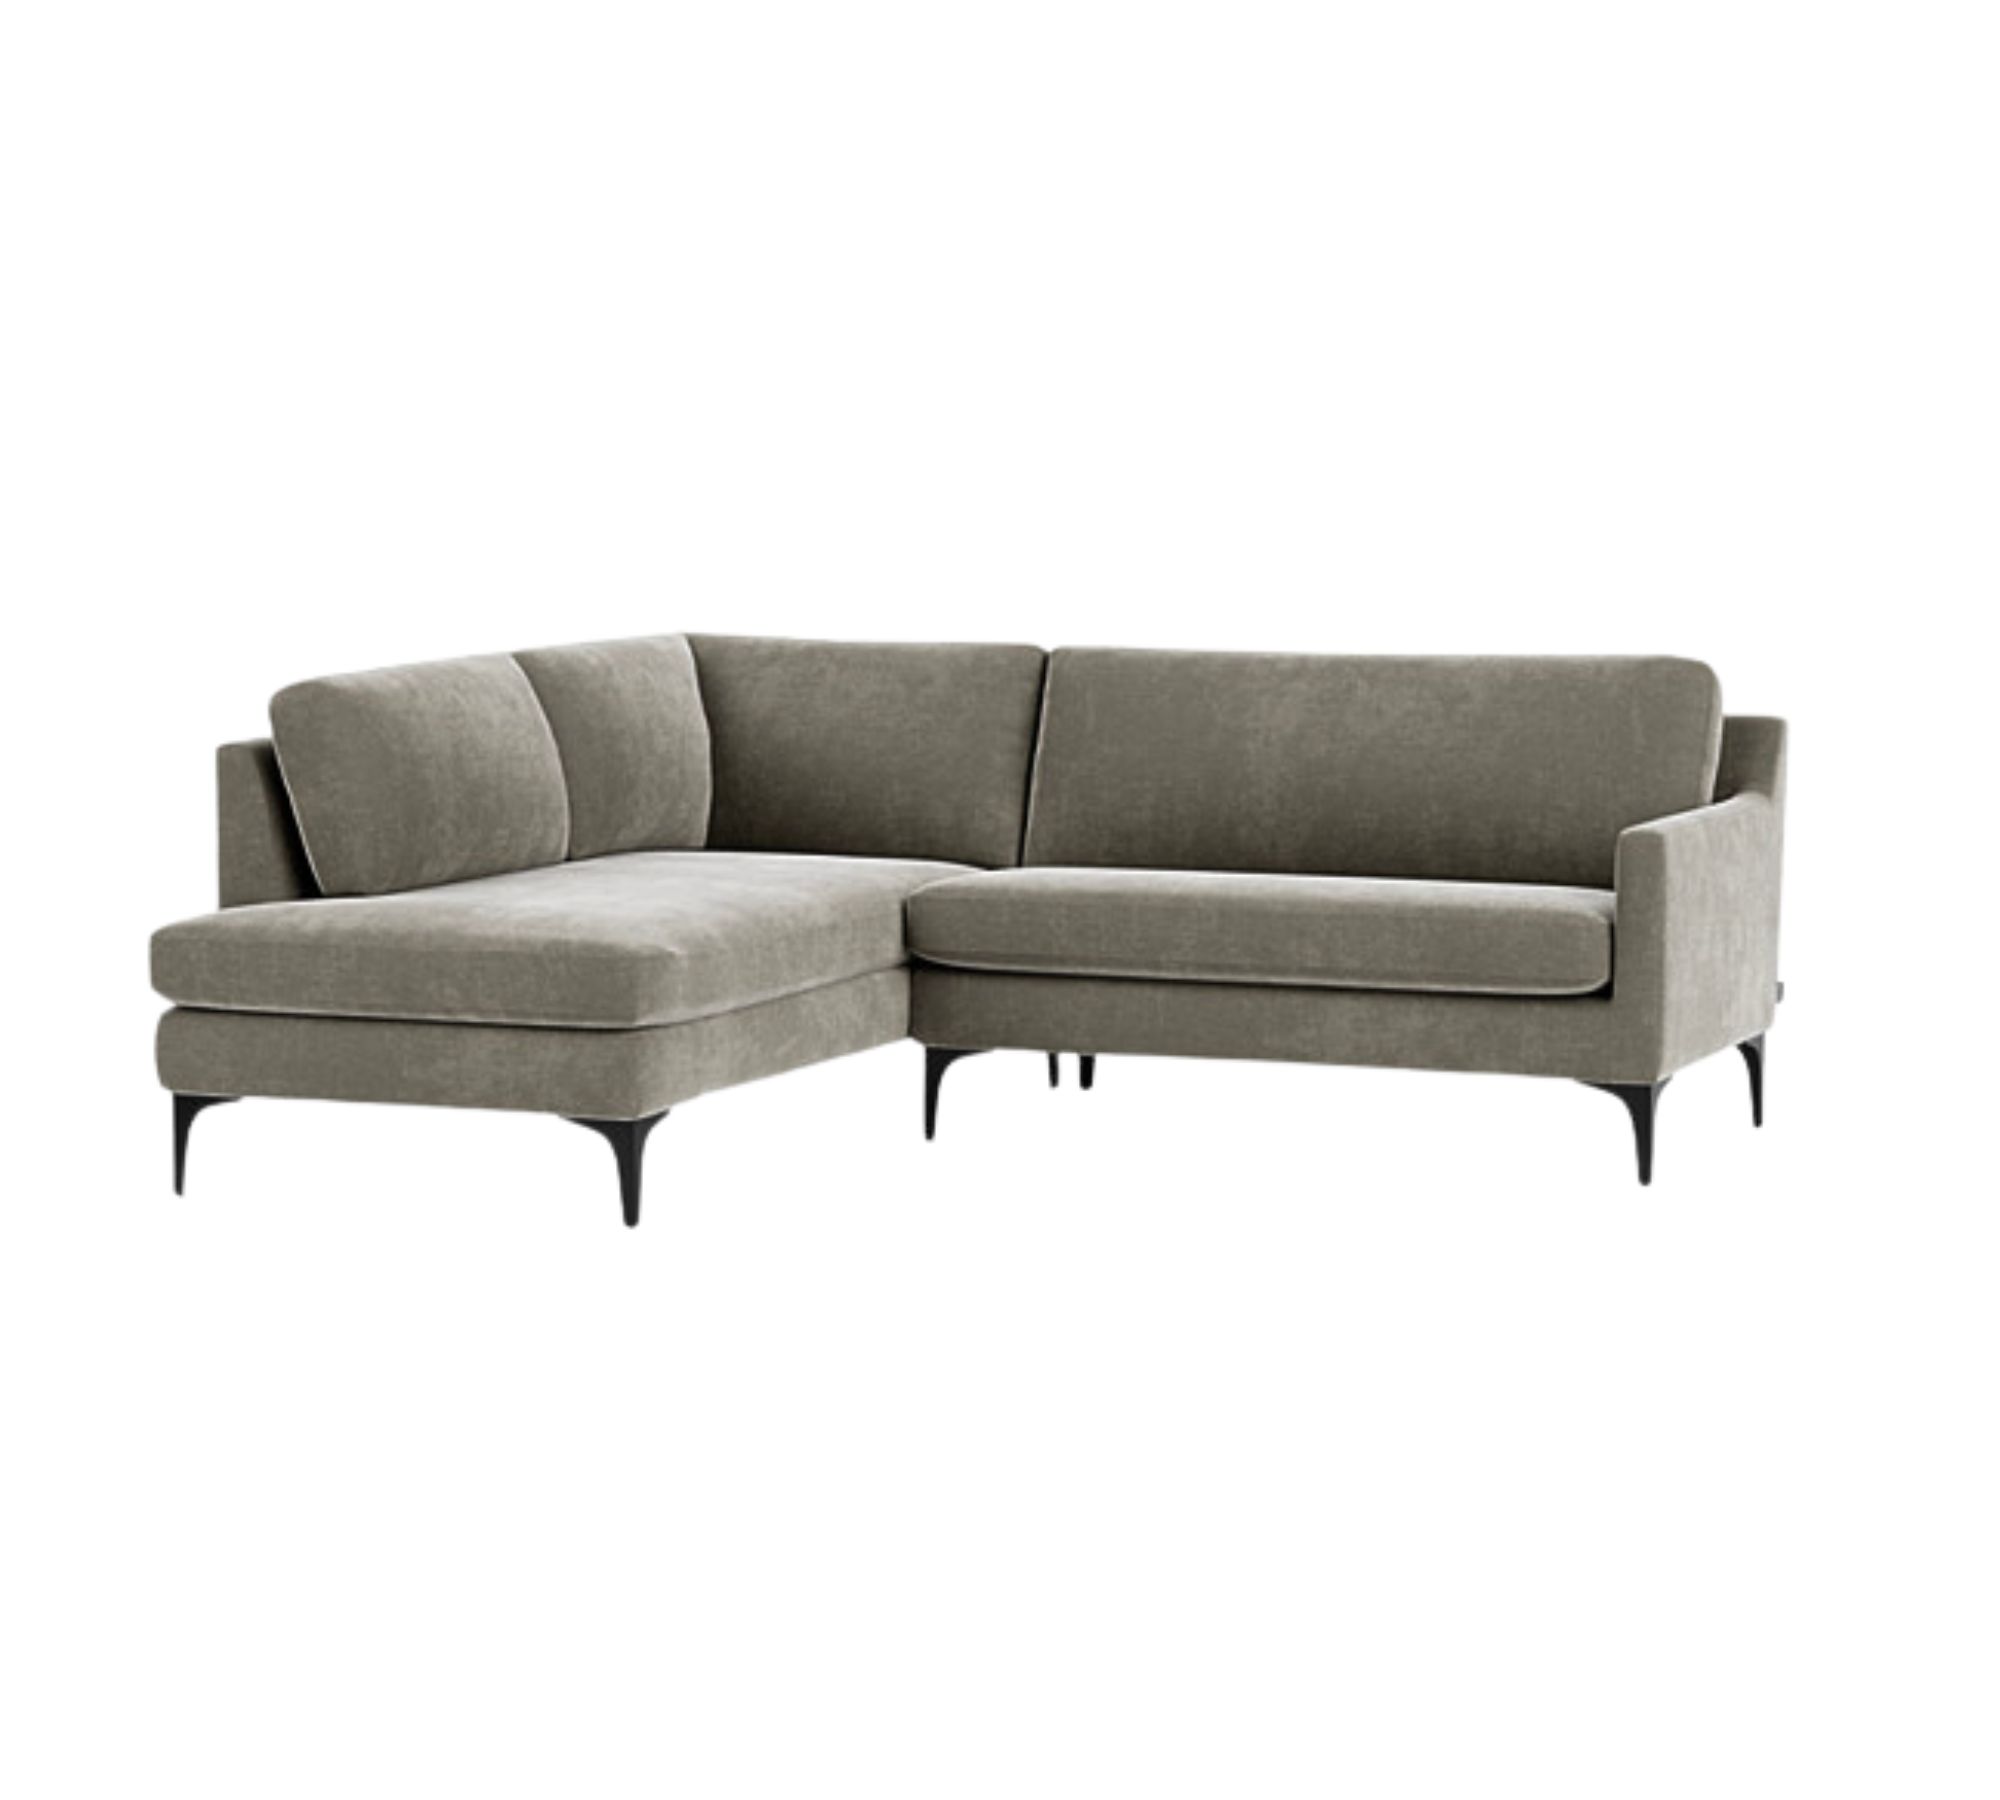 Astha Sofa Récamiere Links Planet Grey Green